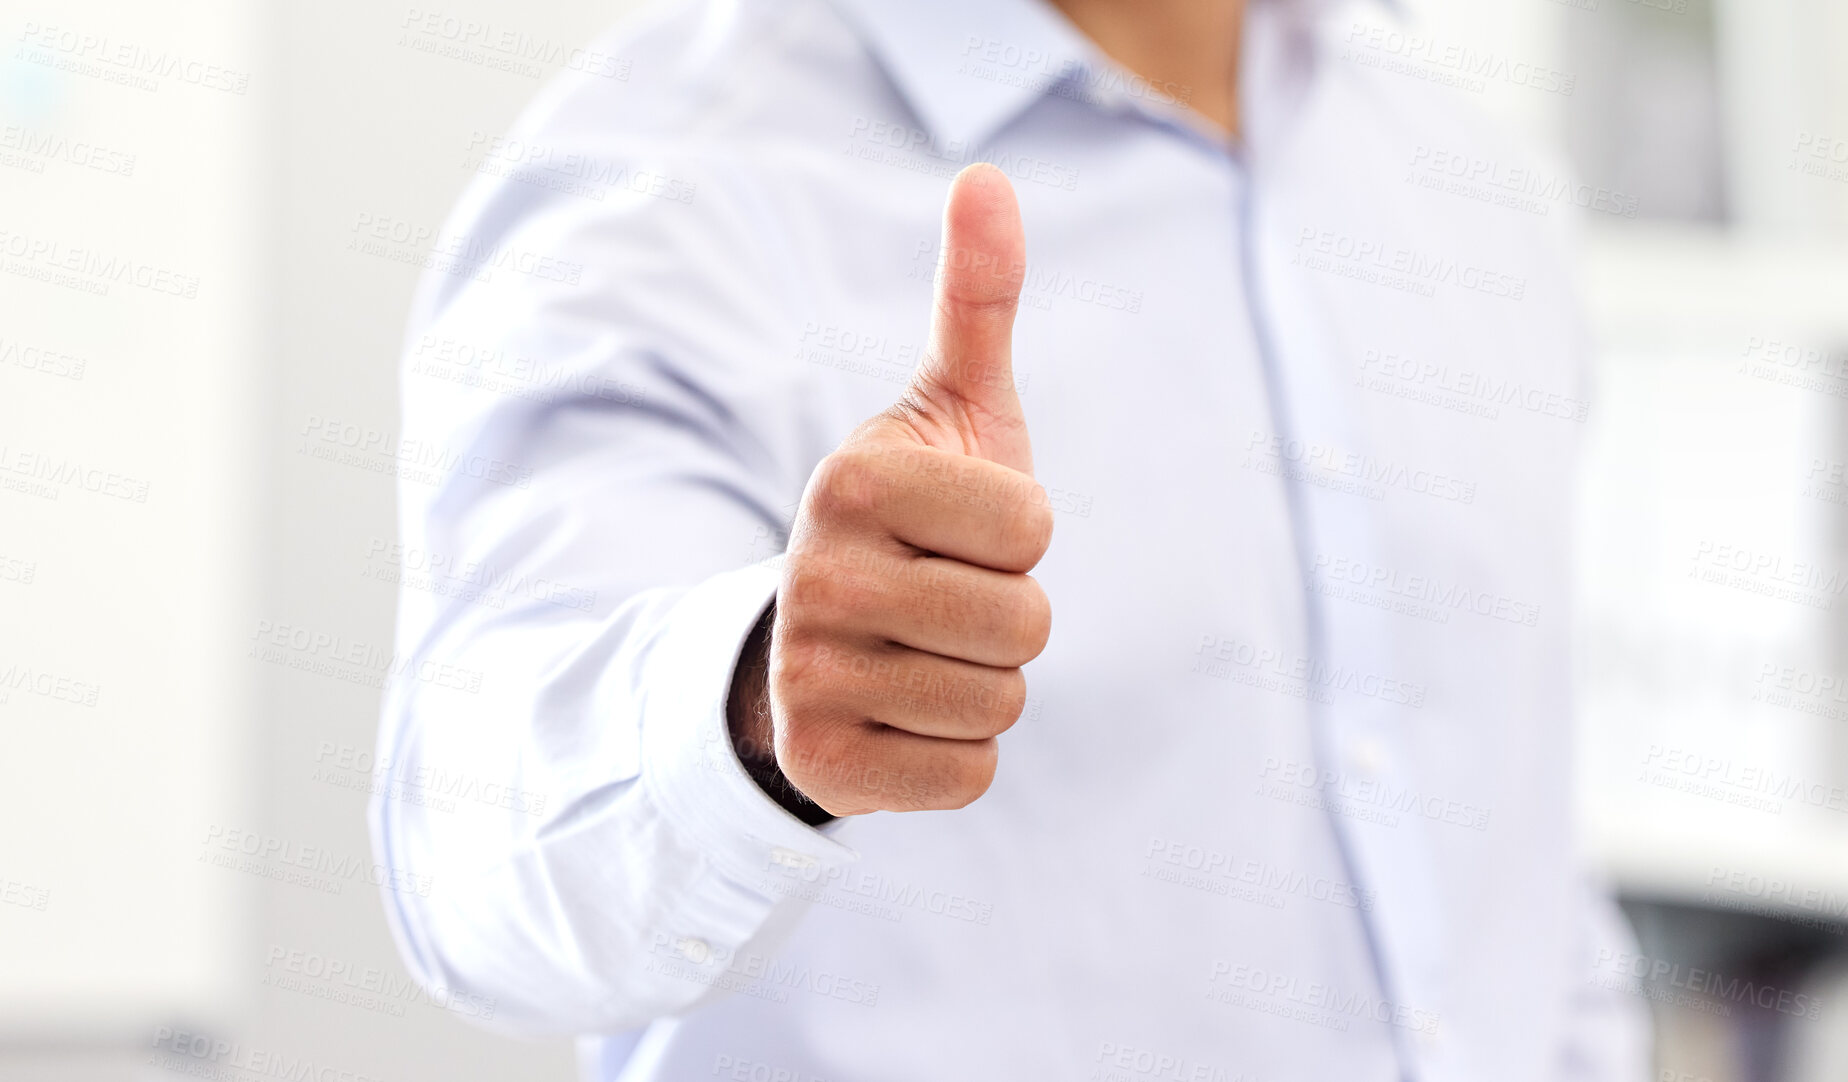 Buy stock photo Thumbs up for celebrating success and good work, hand of business man, manager or entrepreneur showing hand gesture. Closeup sign and positive symbol of approval, agreement and trust on fingers